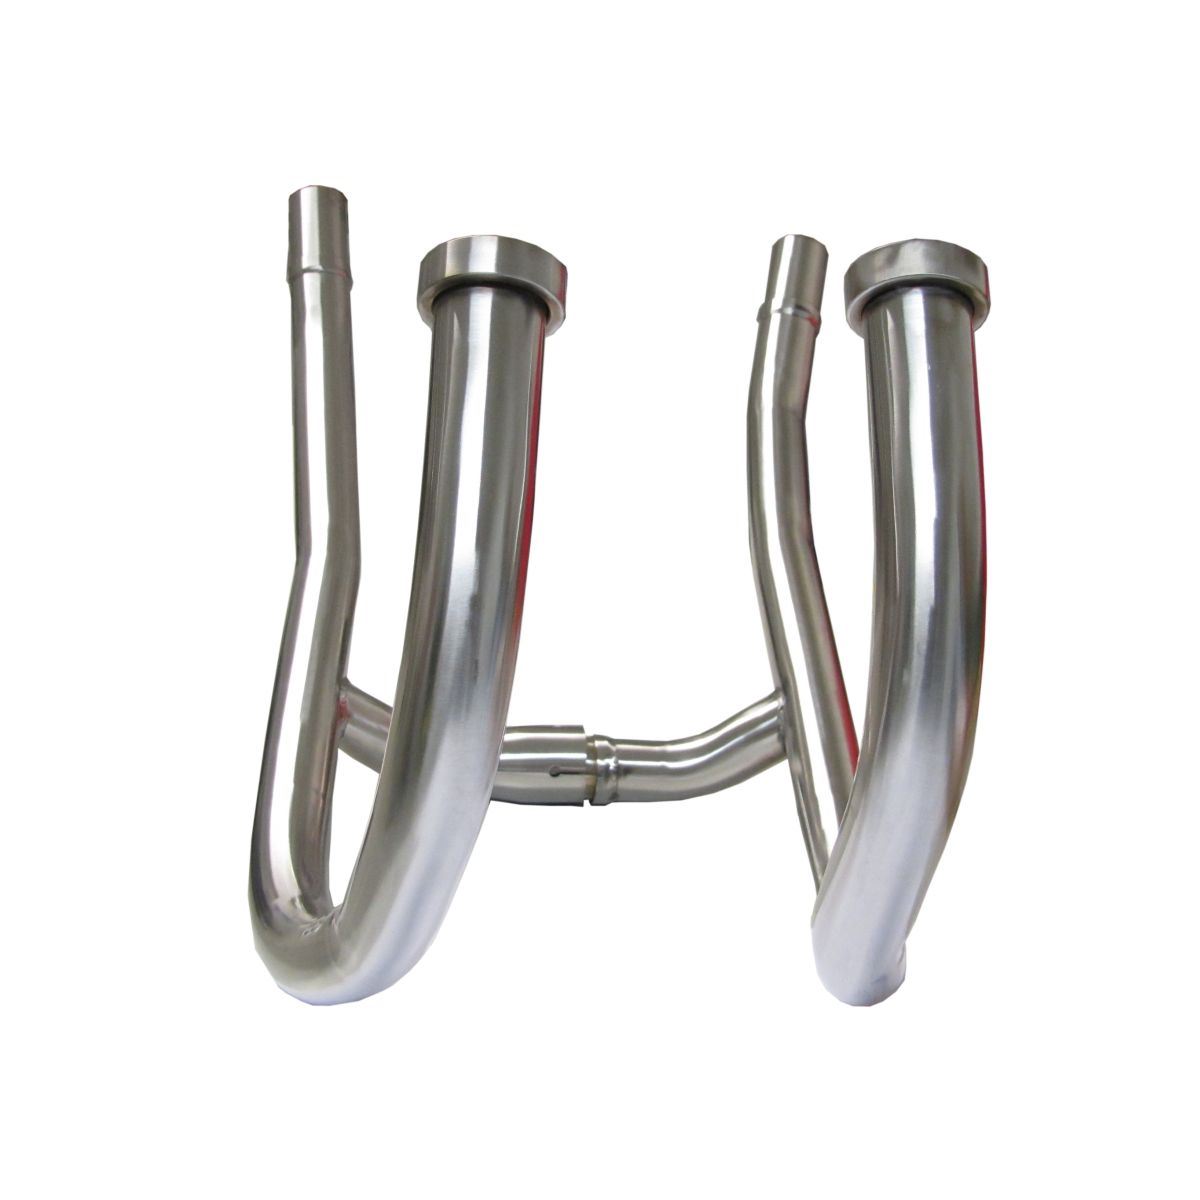 AW Motorcycle Parts. Exhaust Front Down Pipes Stainless GPZ500S